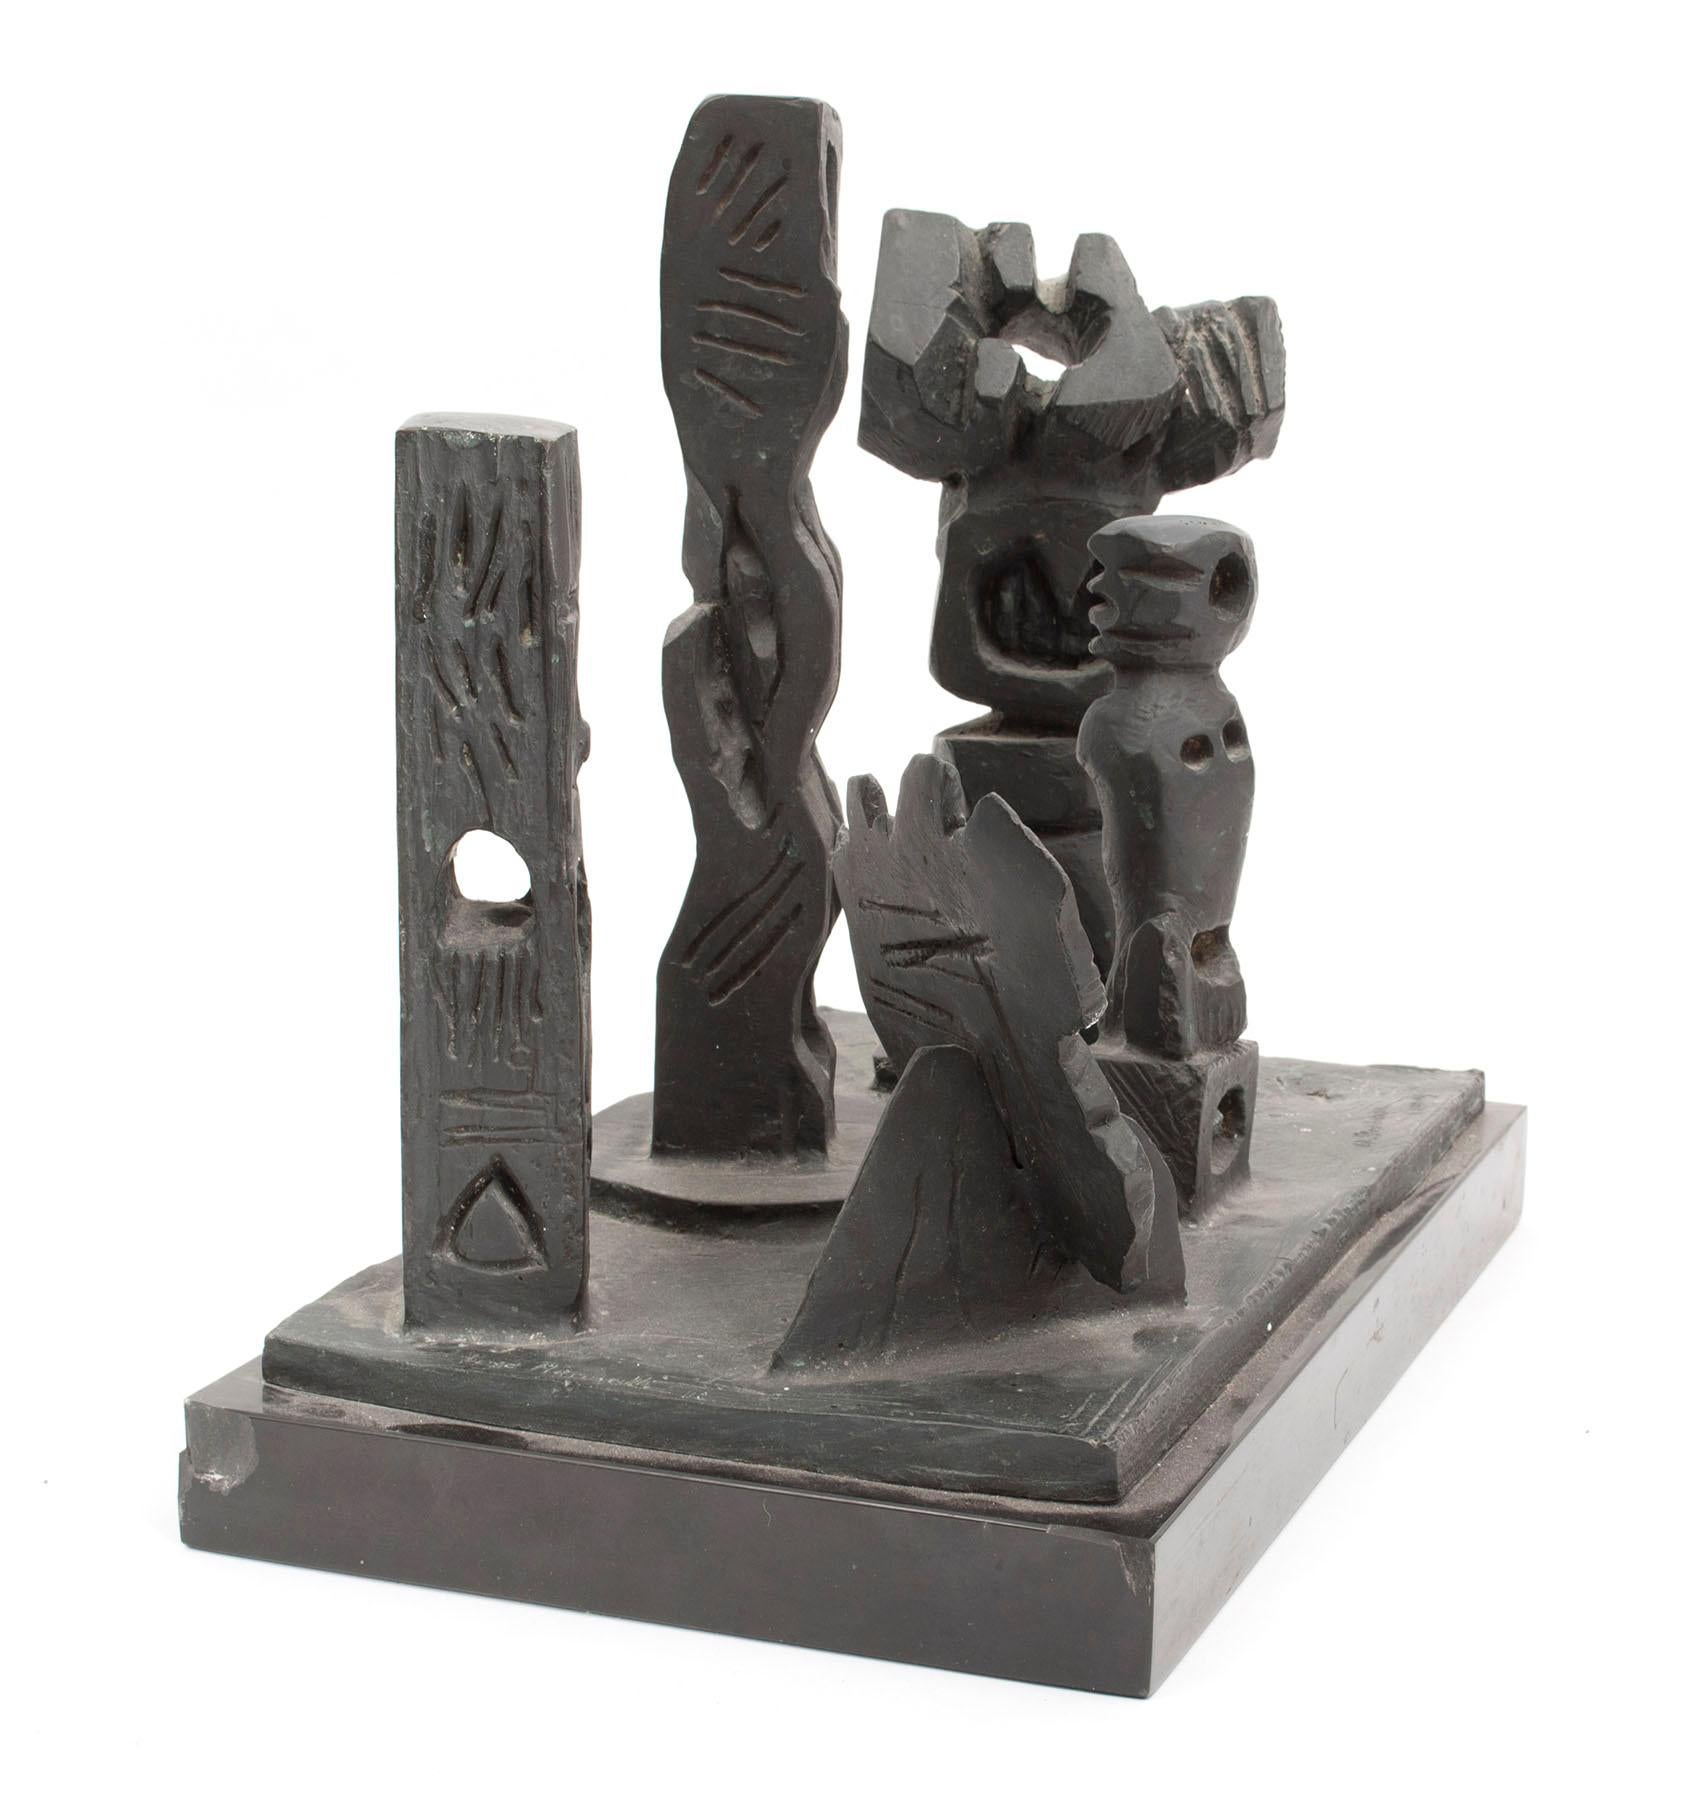 Brutalist Modernist Abstract Bronze Sculpture Totems Manner of Louise Nevelson - Painting by Abbott Pattison